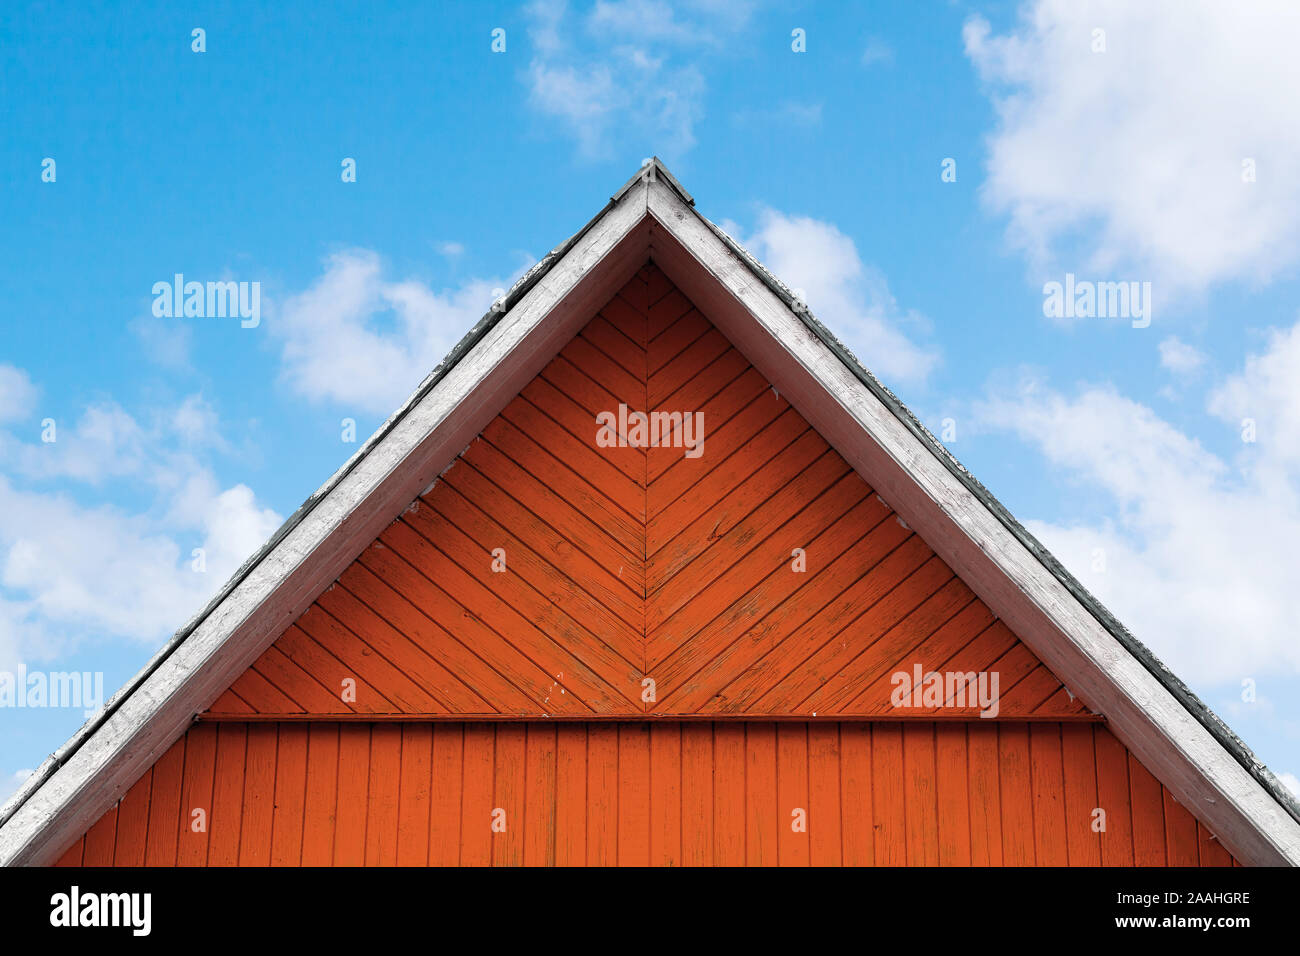 Red wooden gable under blue cloudy sky, rural Scandinavian architecture background Stock Photo